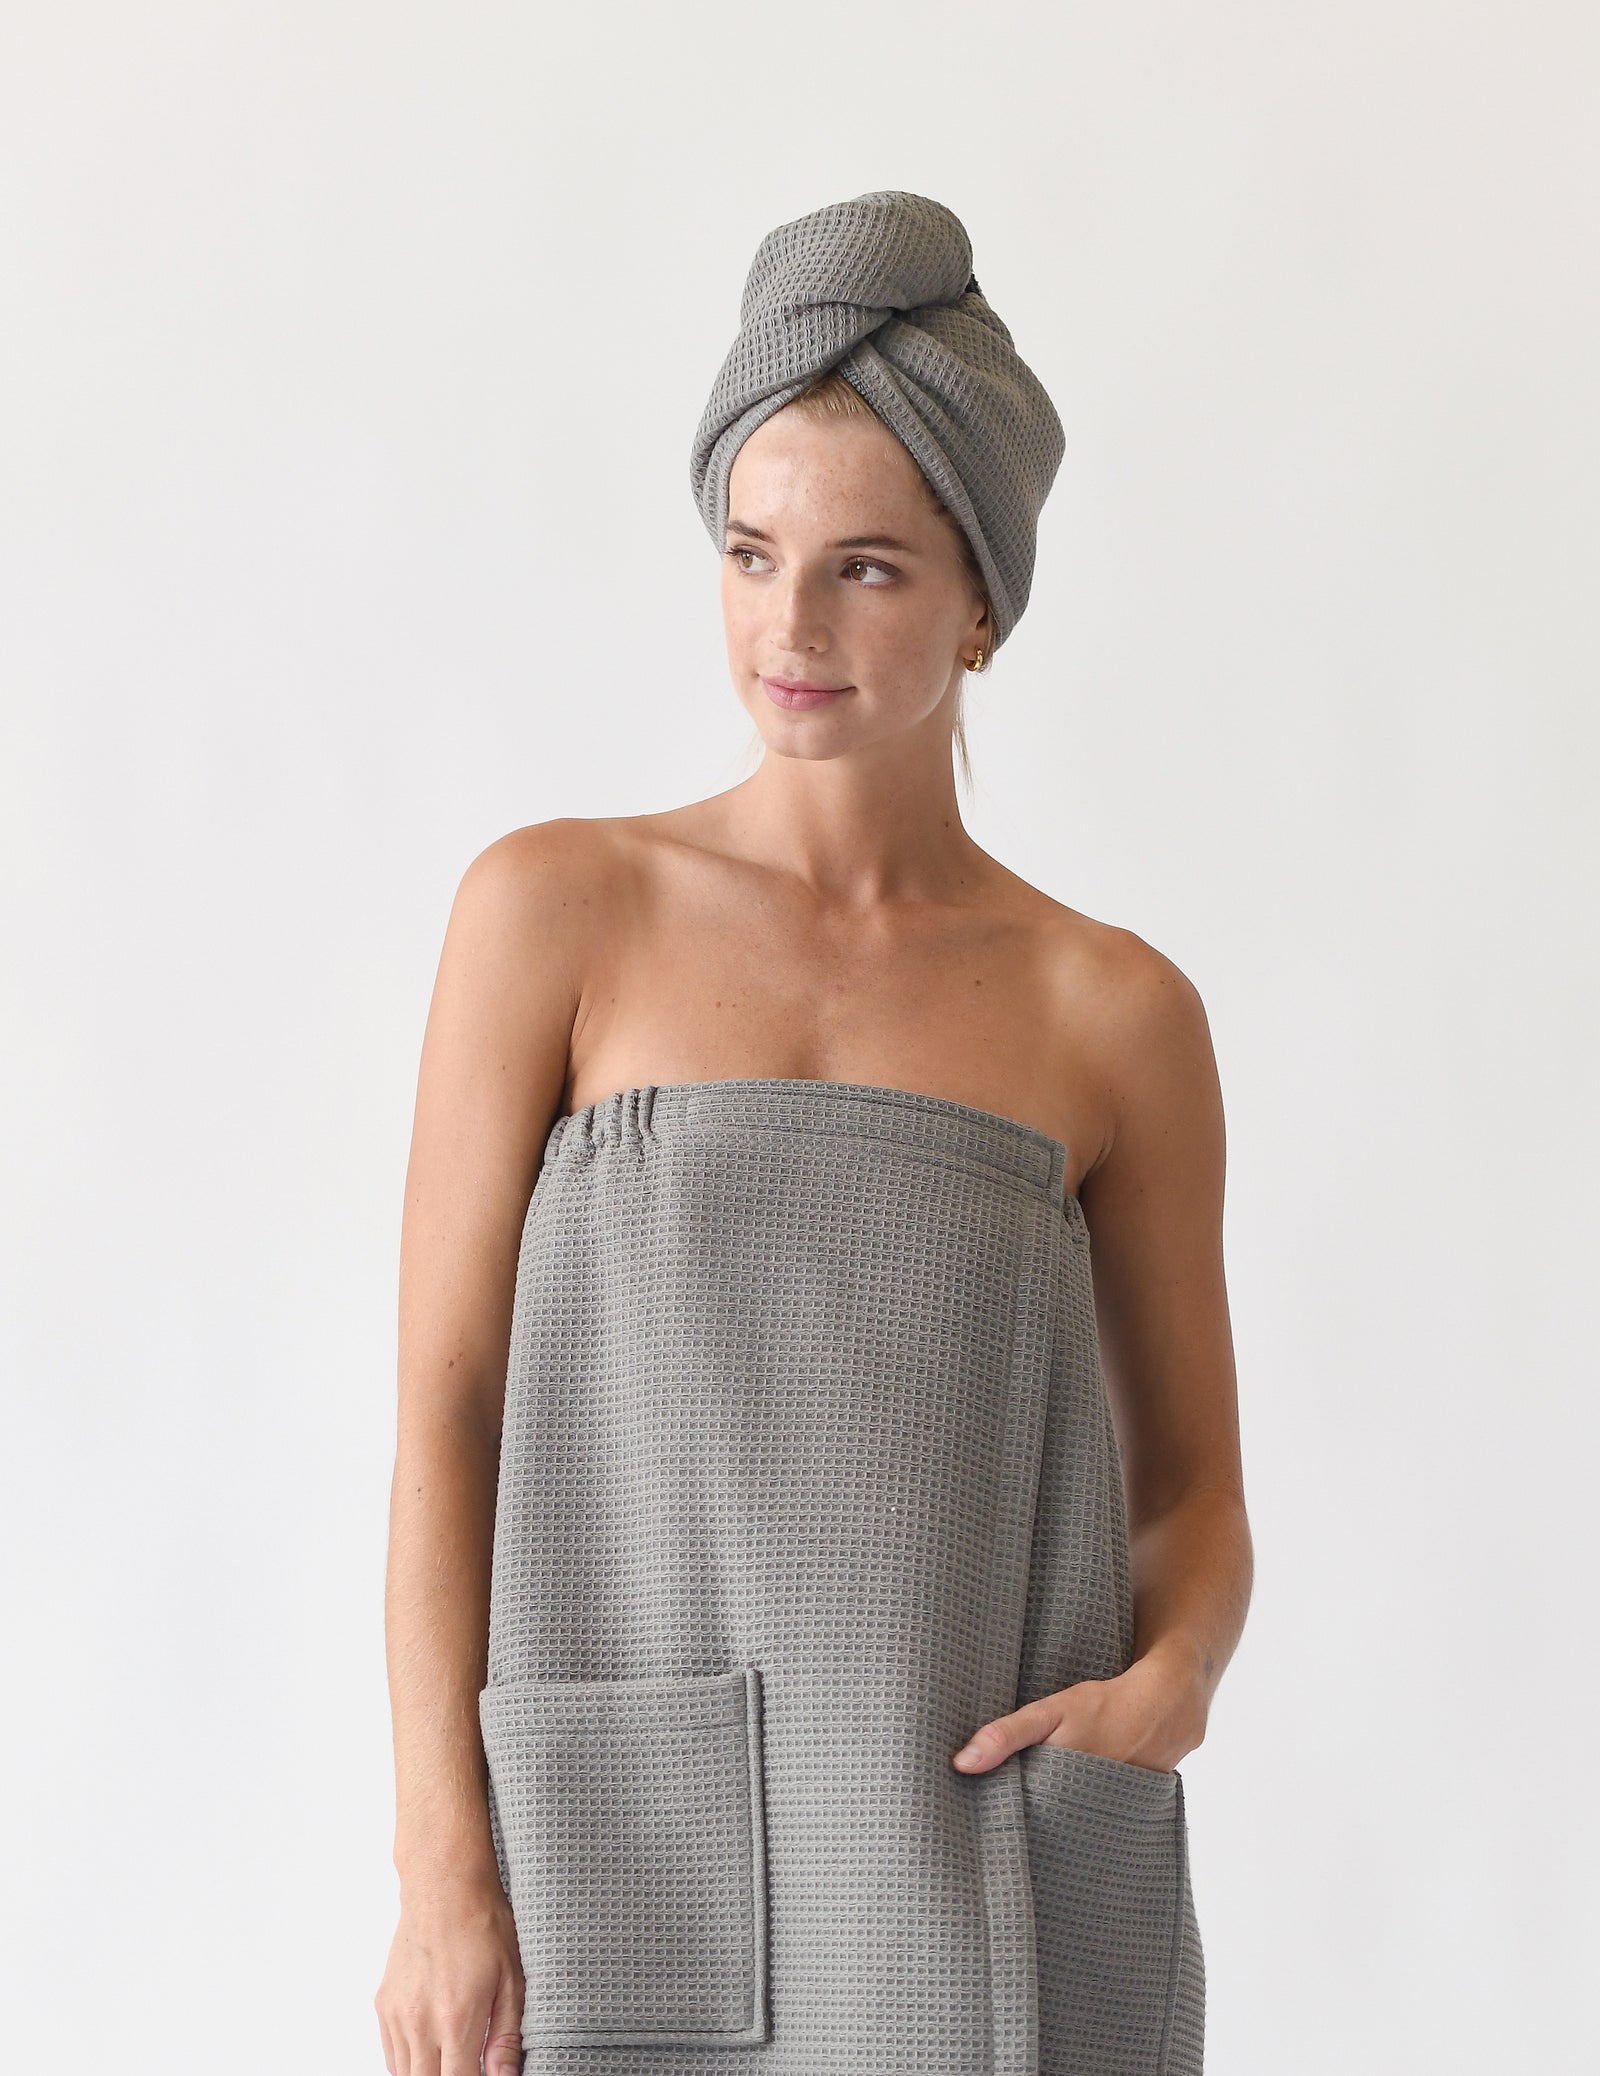 Charcoal Waffle Hair Towel. The hair towel is shown being worn by a woman who is also wearing a waffle bath wrap. Photo was taken with a white background.